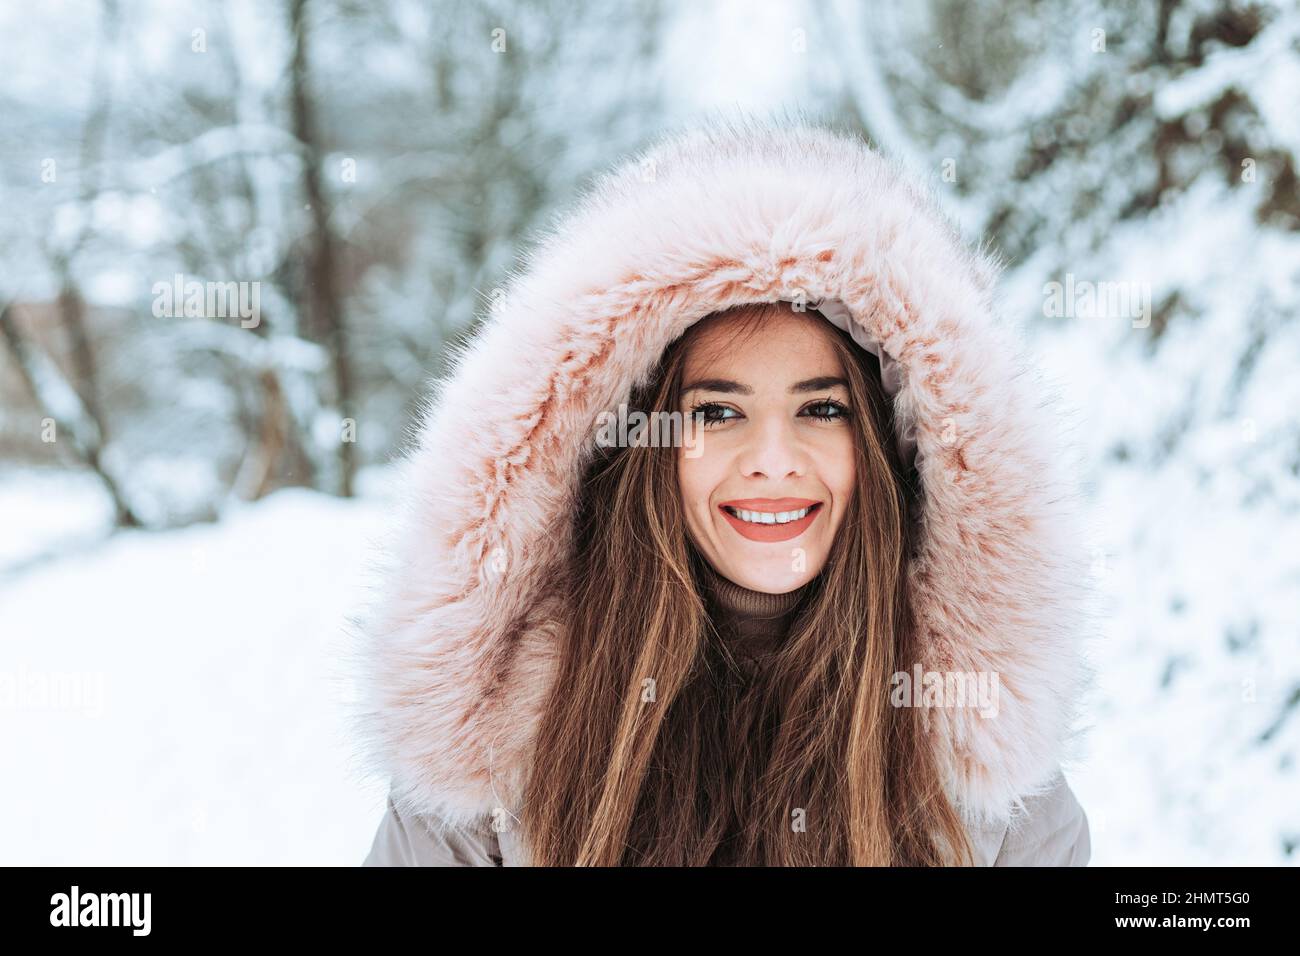 Outdoor portrait of a young woman in winter fur jacket Stock Photo